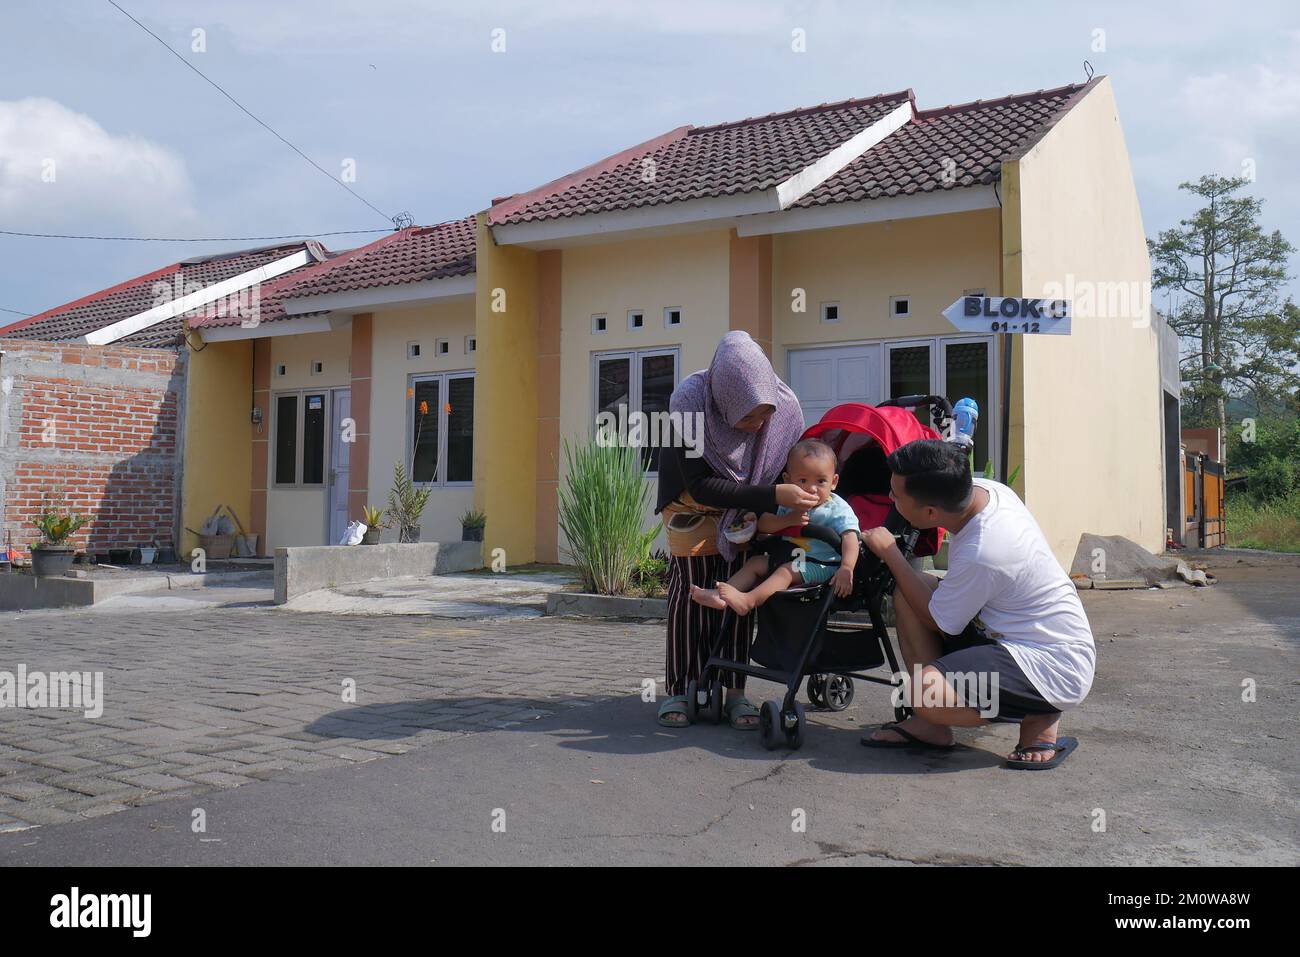 Sufficient Asian housing for a small family consisting of a father, mother and one or two children Stock Photo